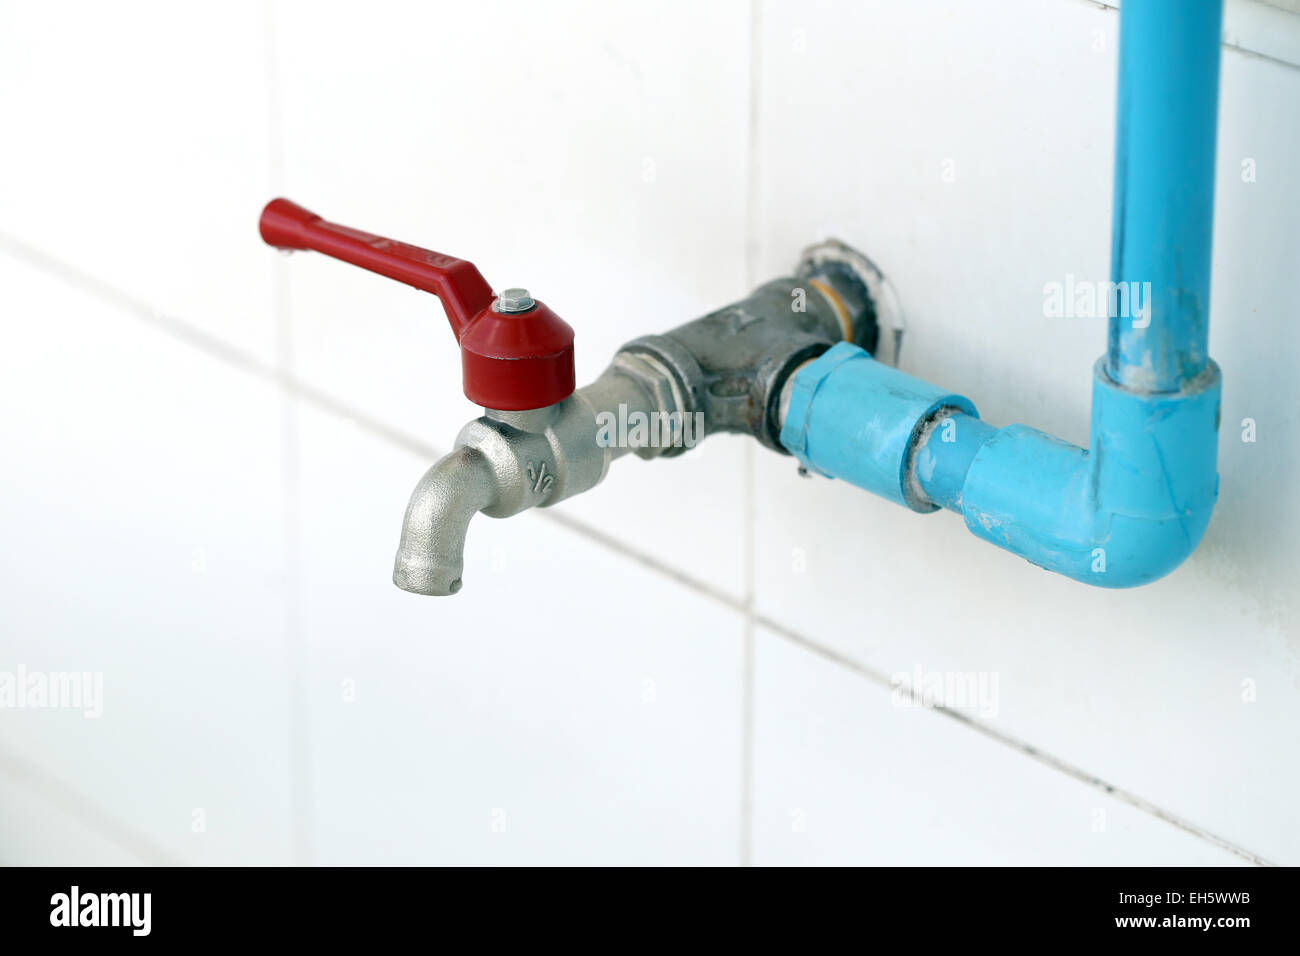 Focus on Faucet of sink in the house. Stock Photo